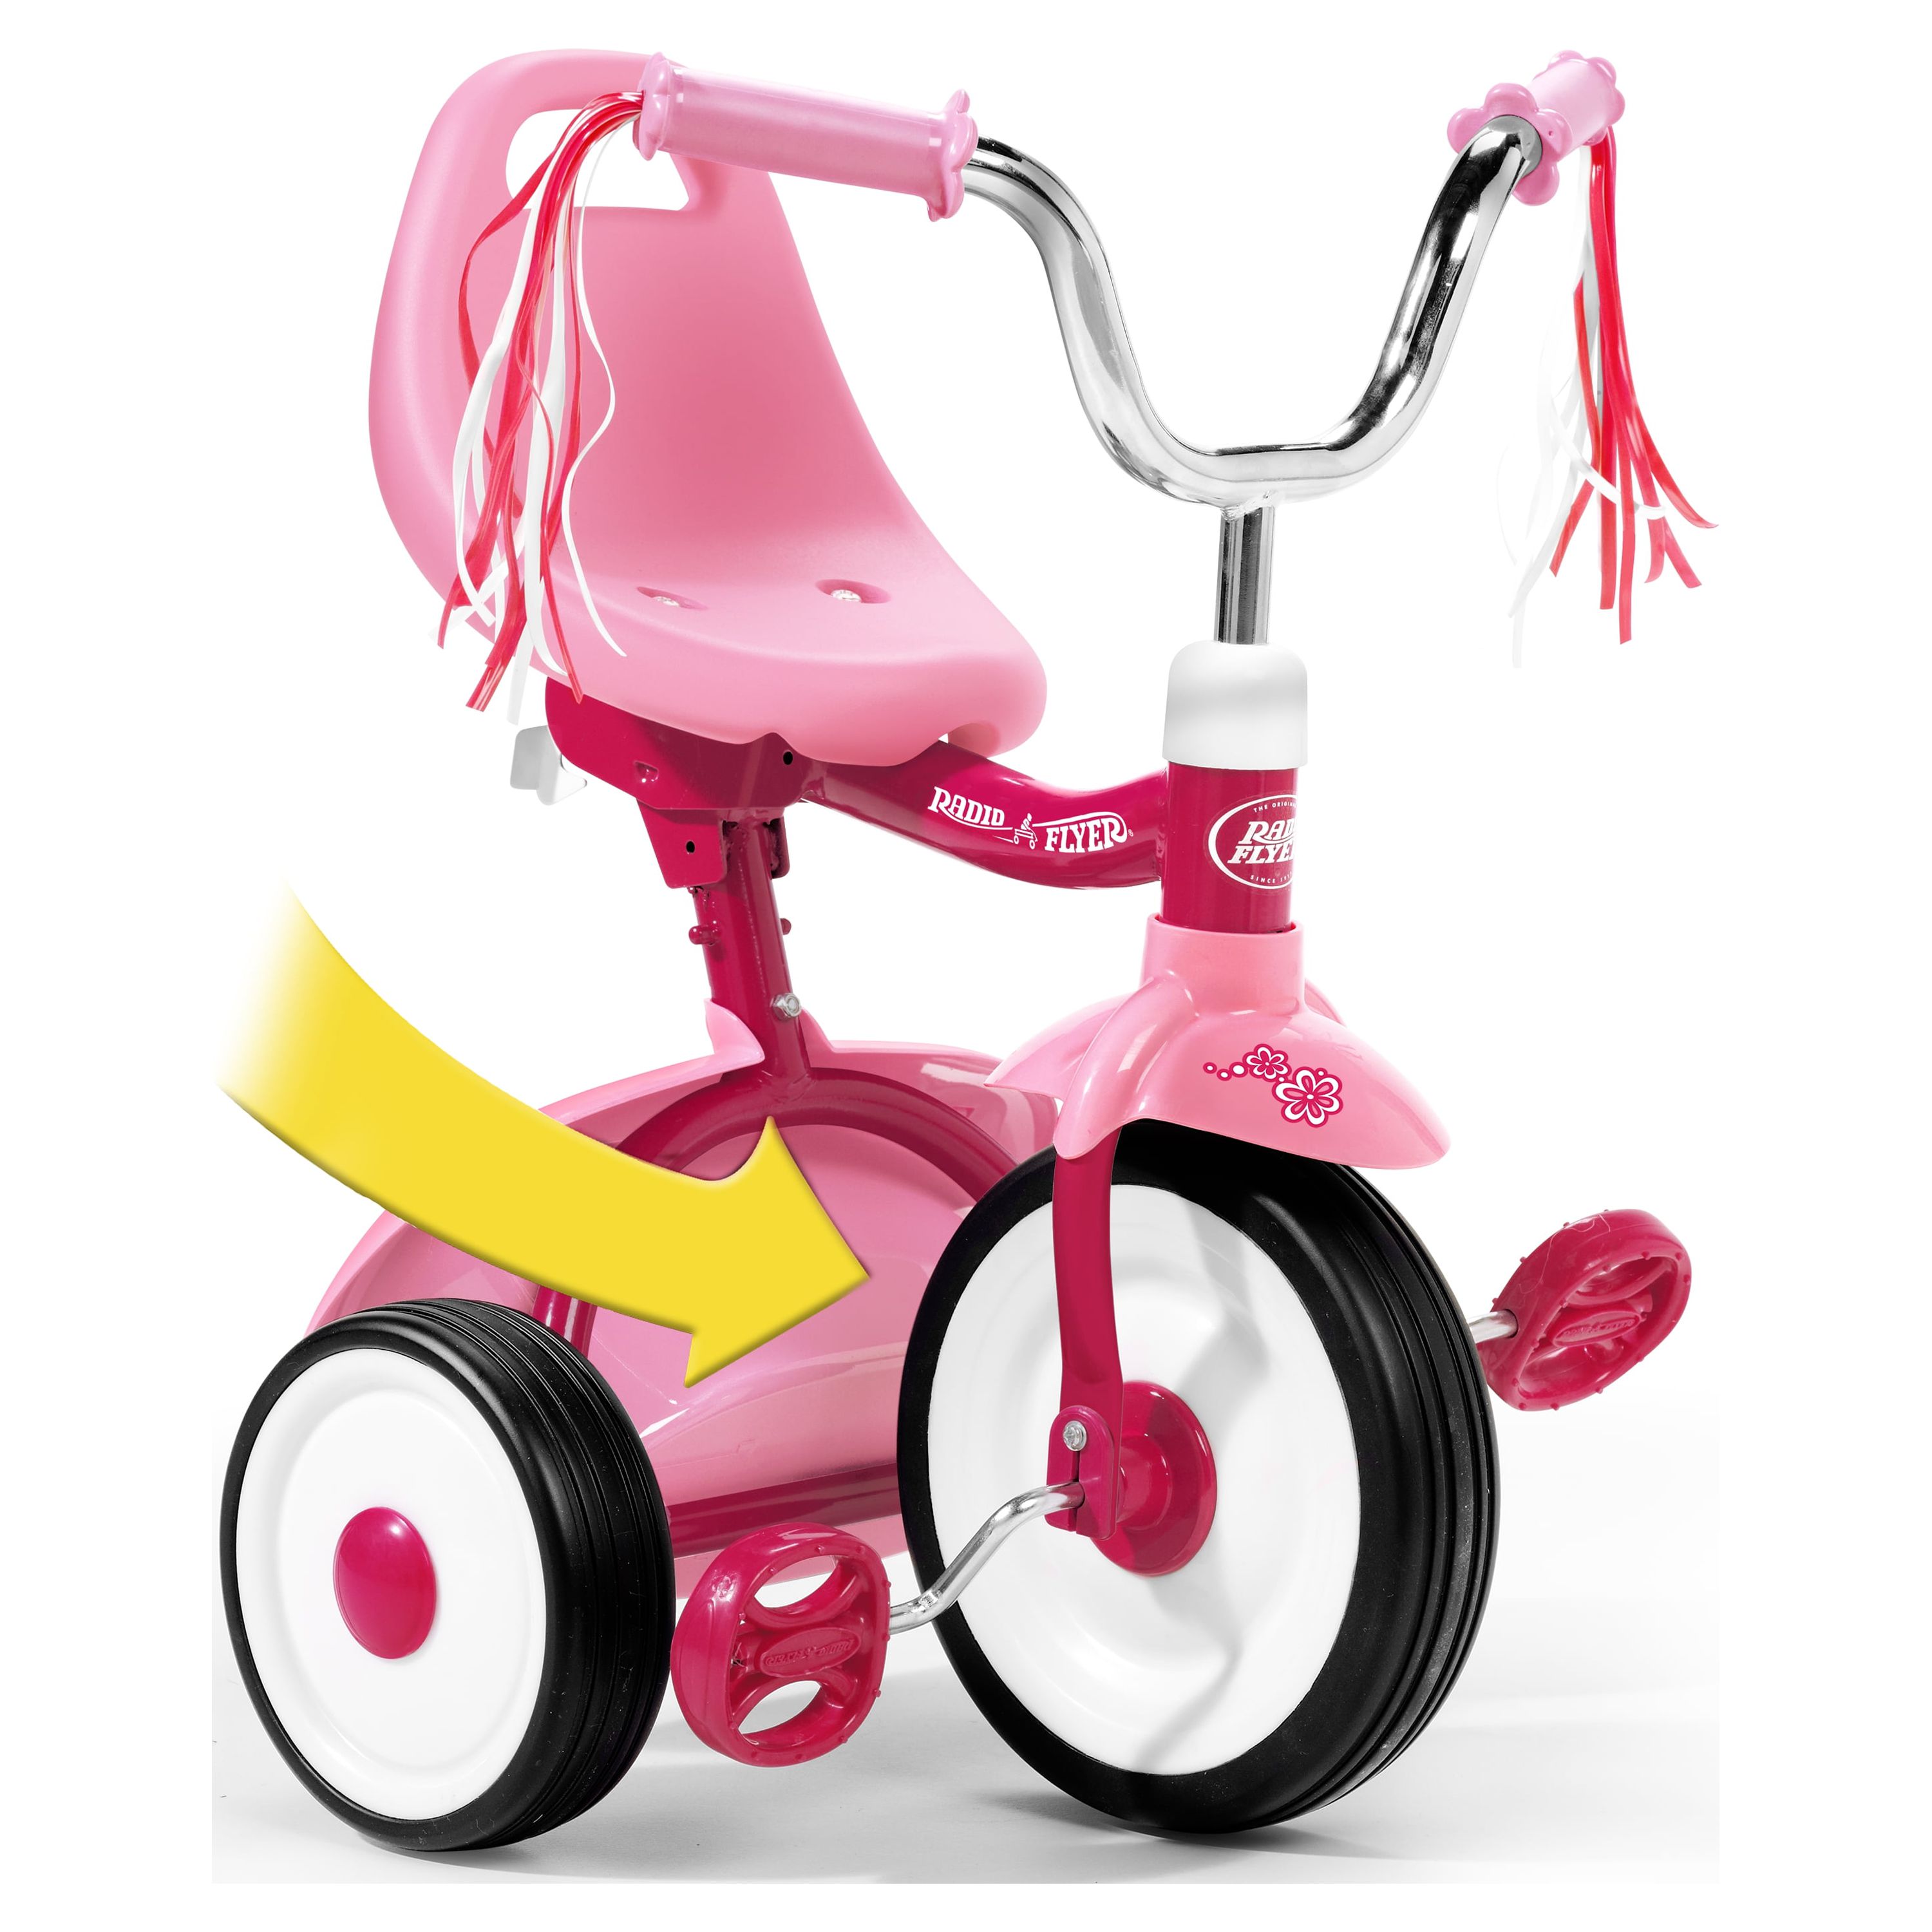 Radio Flyer, Ready to Ride Folding Trike, Fully Assembled, Pink, Beginner Tricycle for Kids, Girls - image 4 of 10